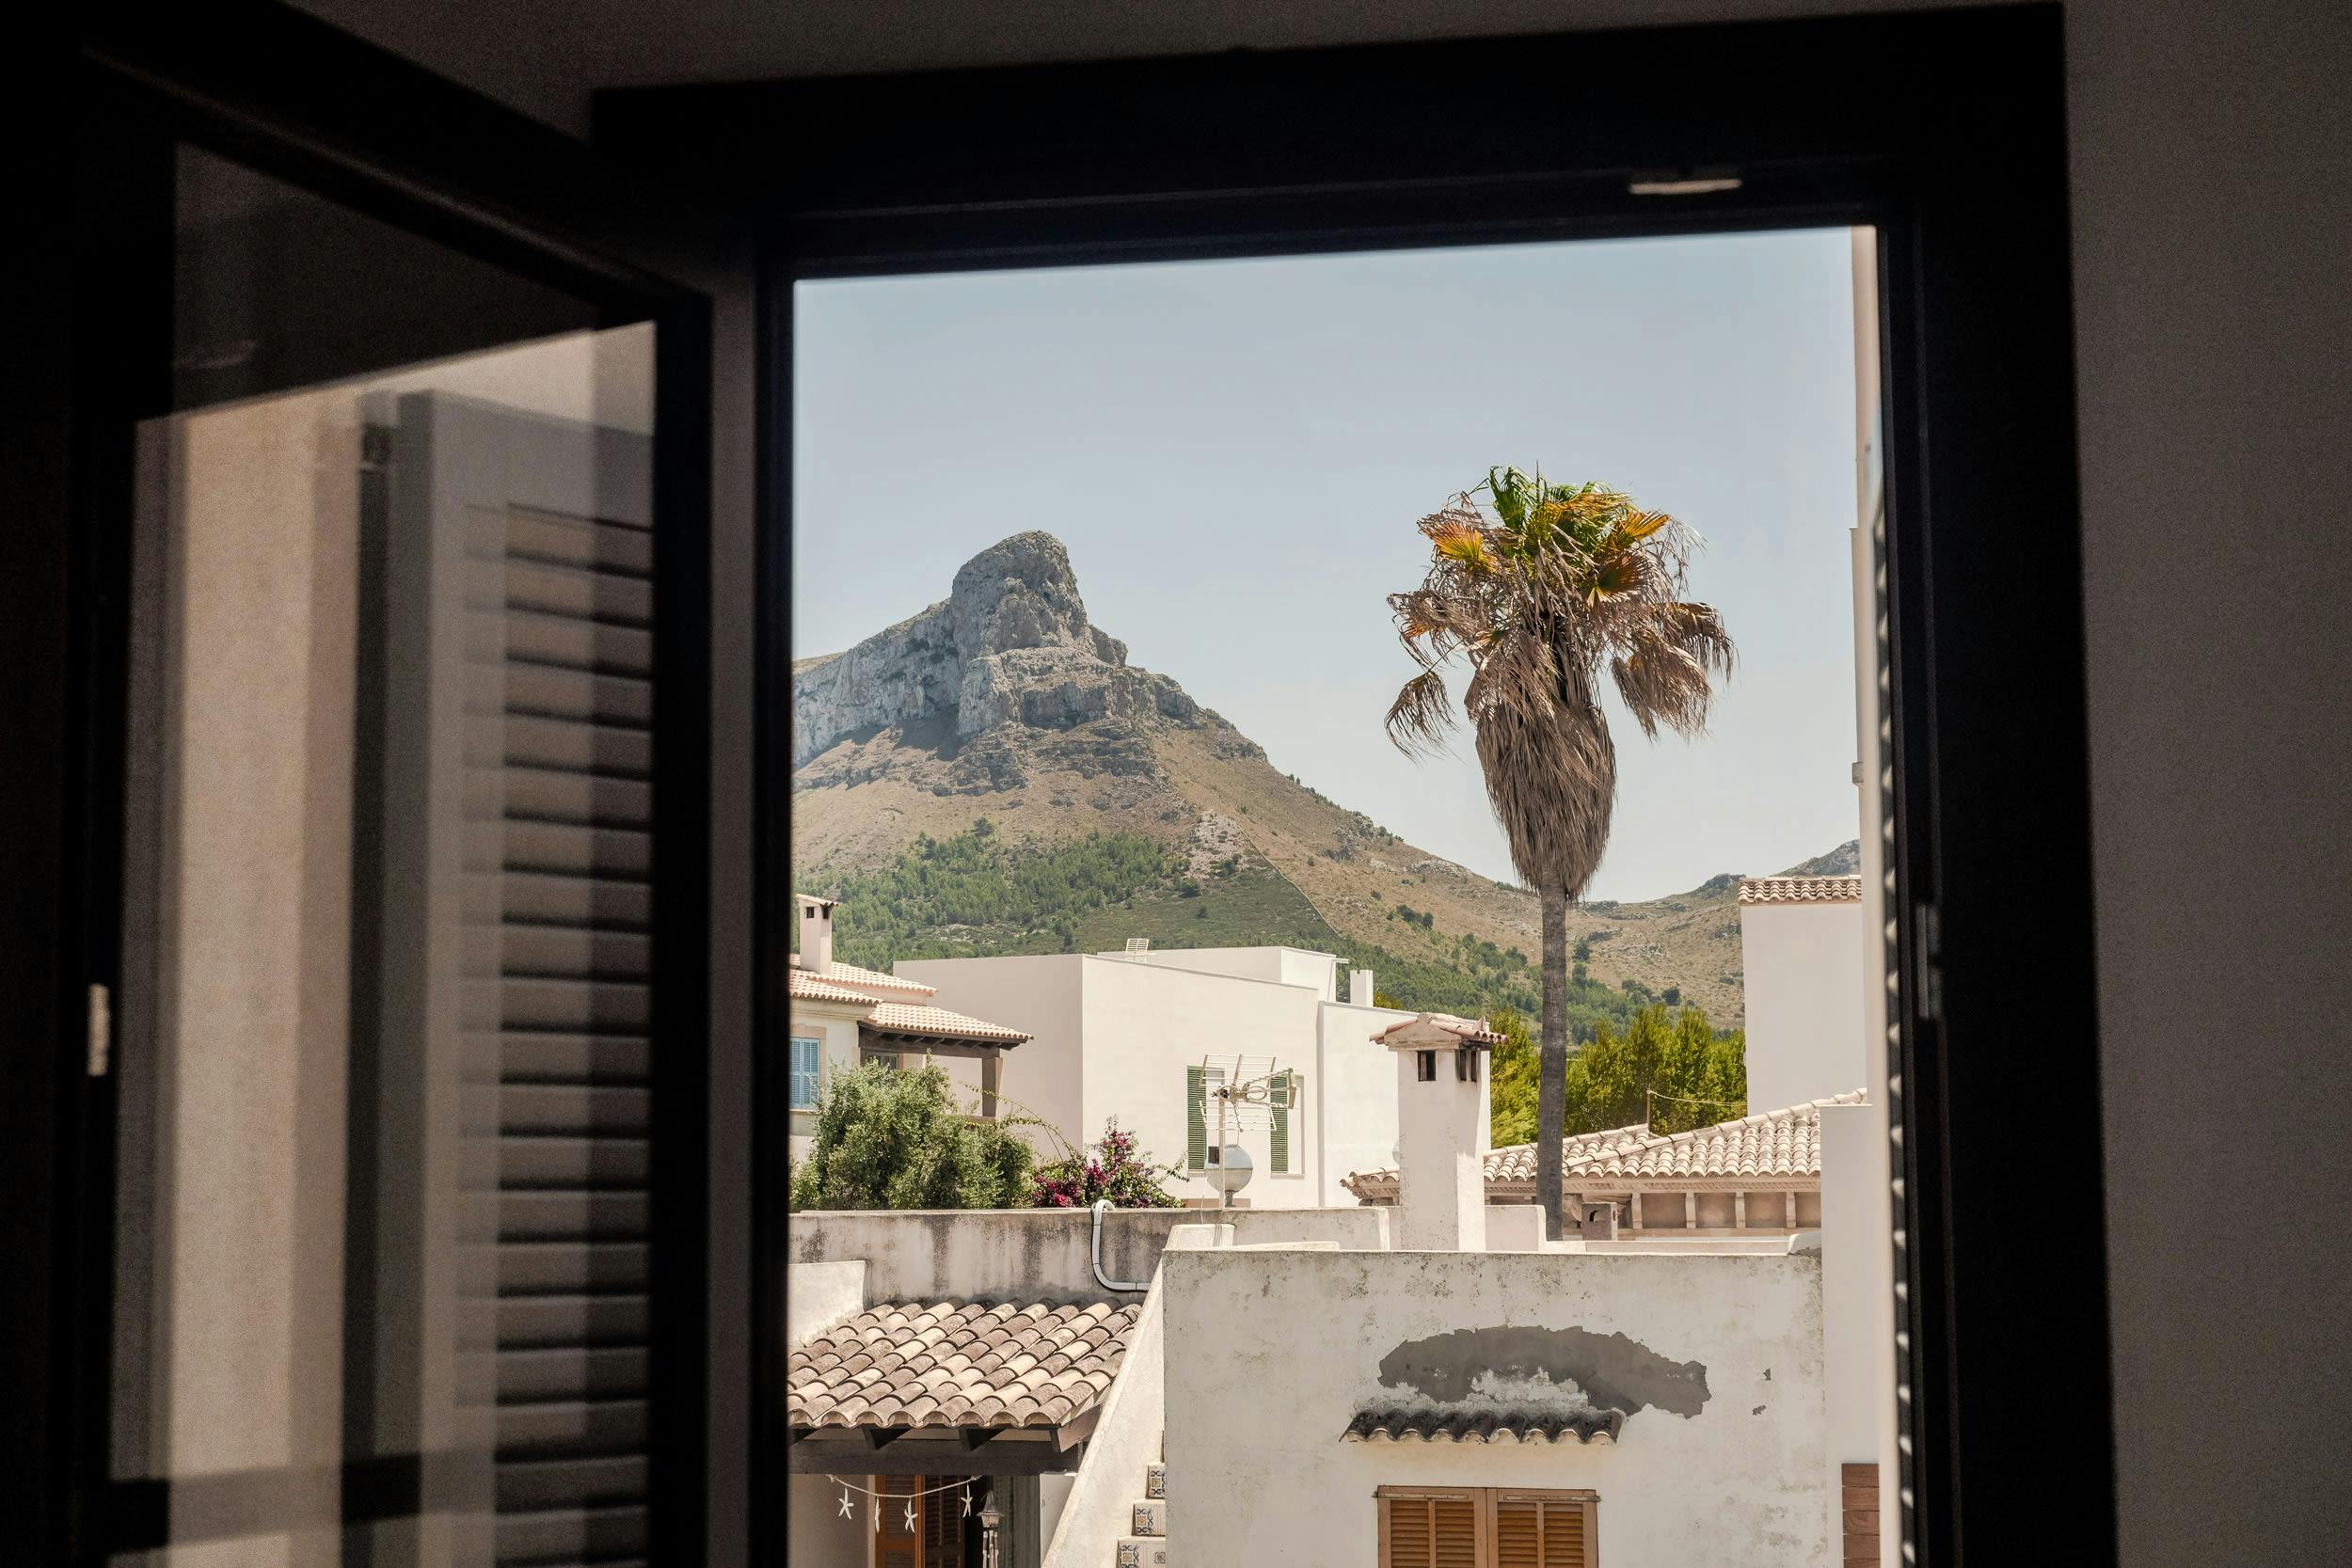 A large window in a building offers a view of a mountain range, with a palm tree in the foreground.